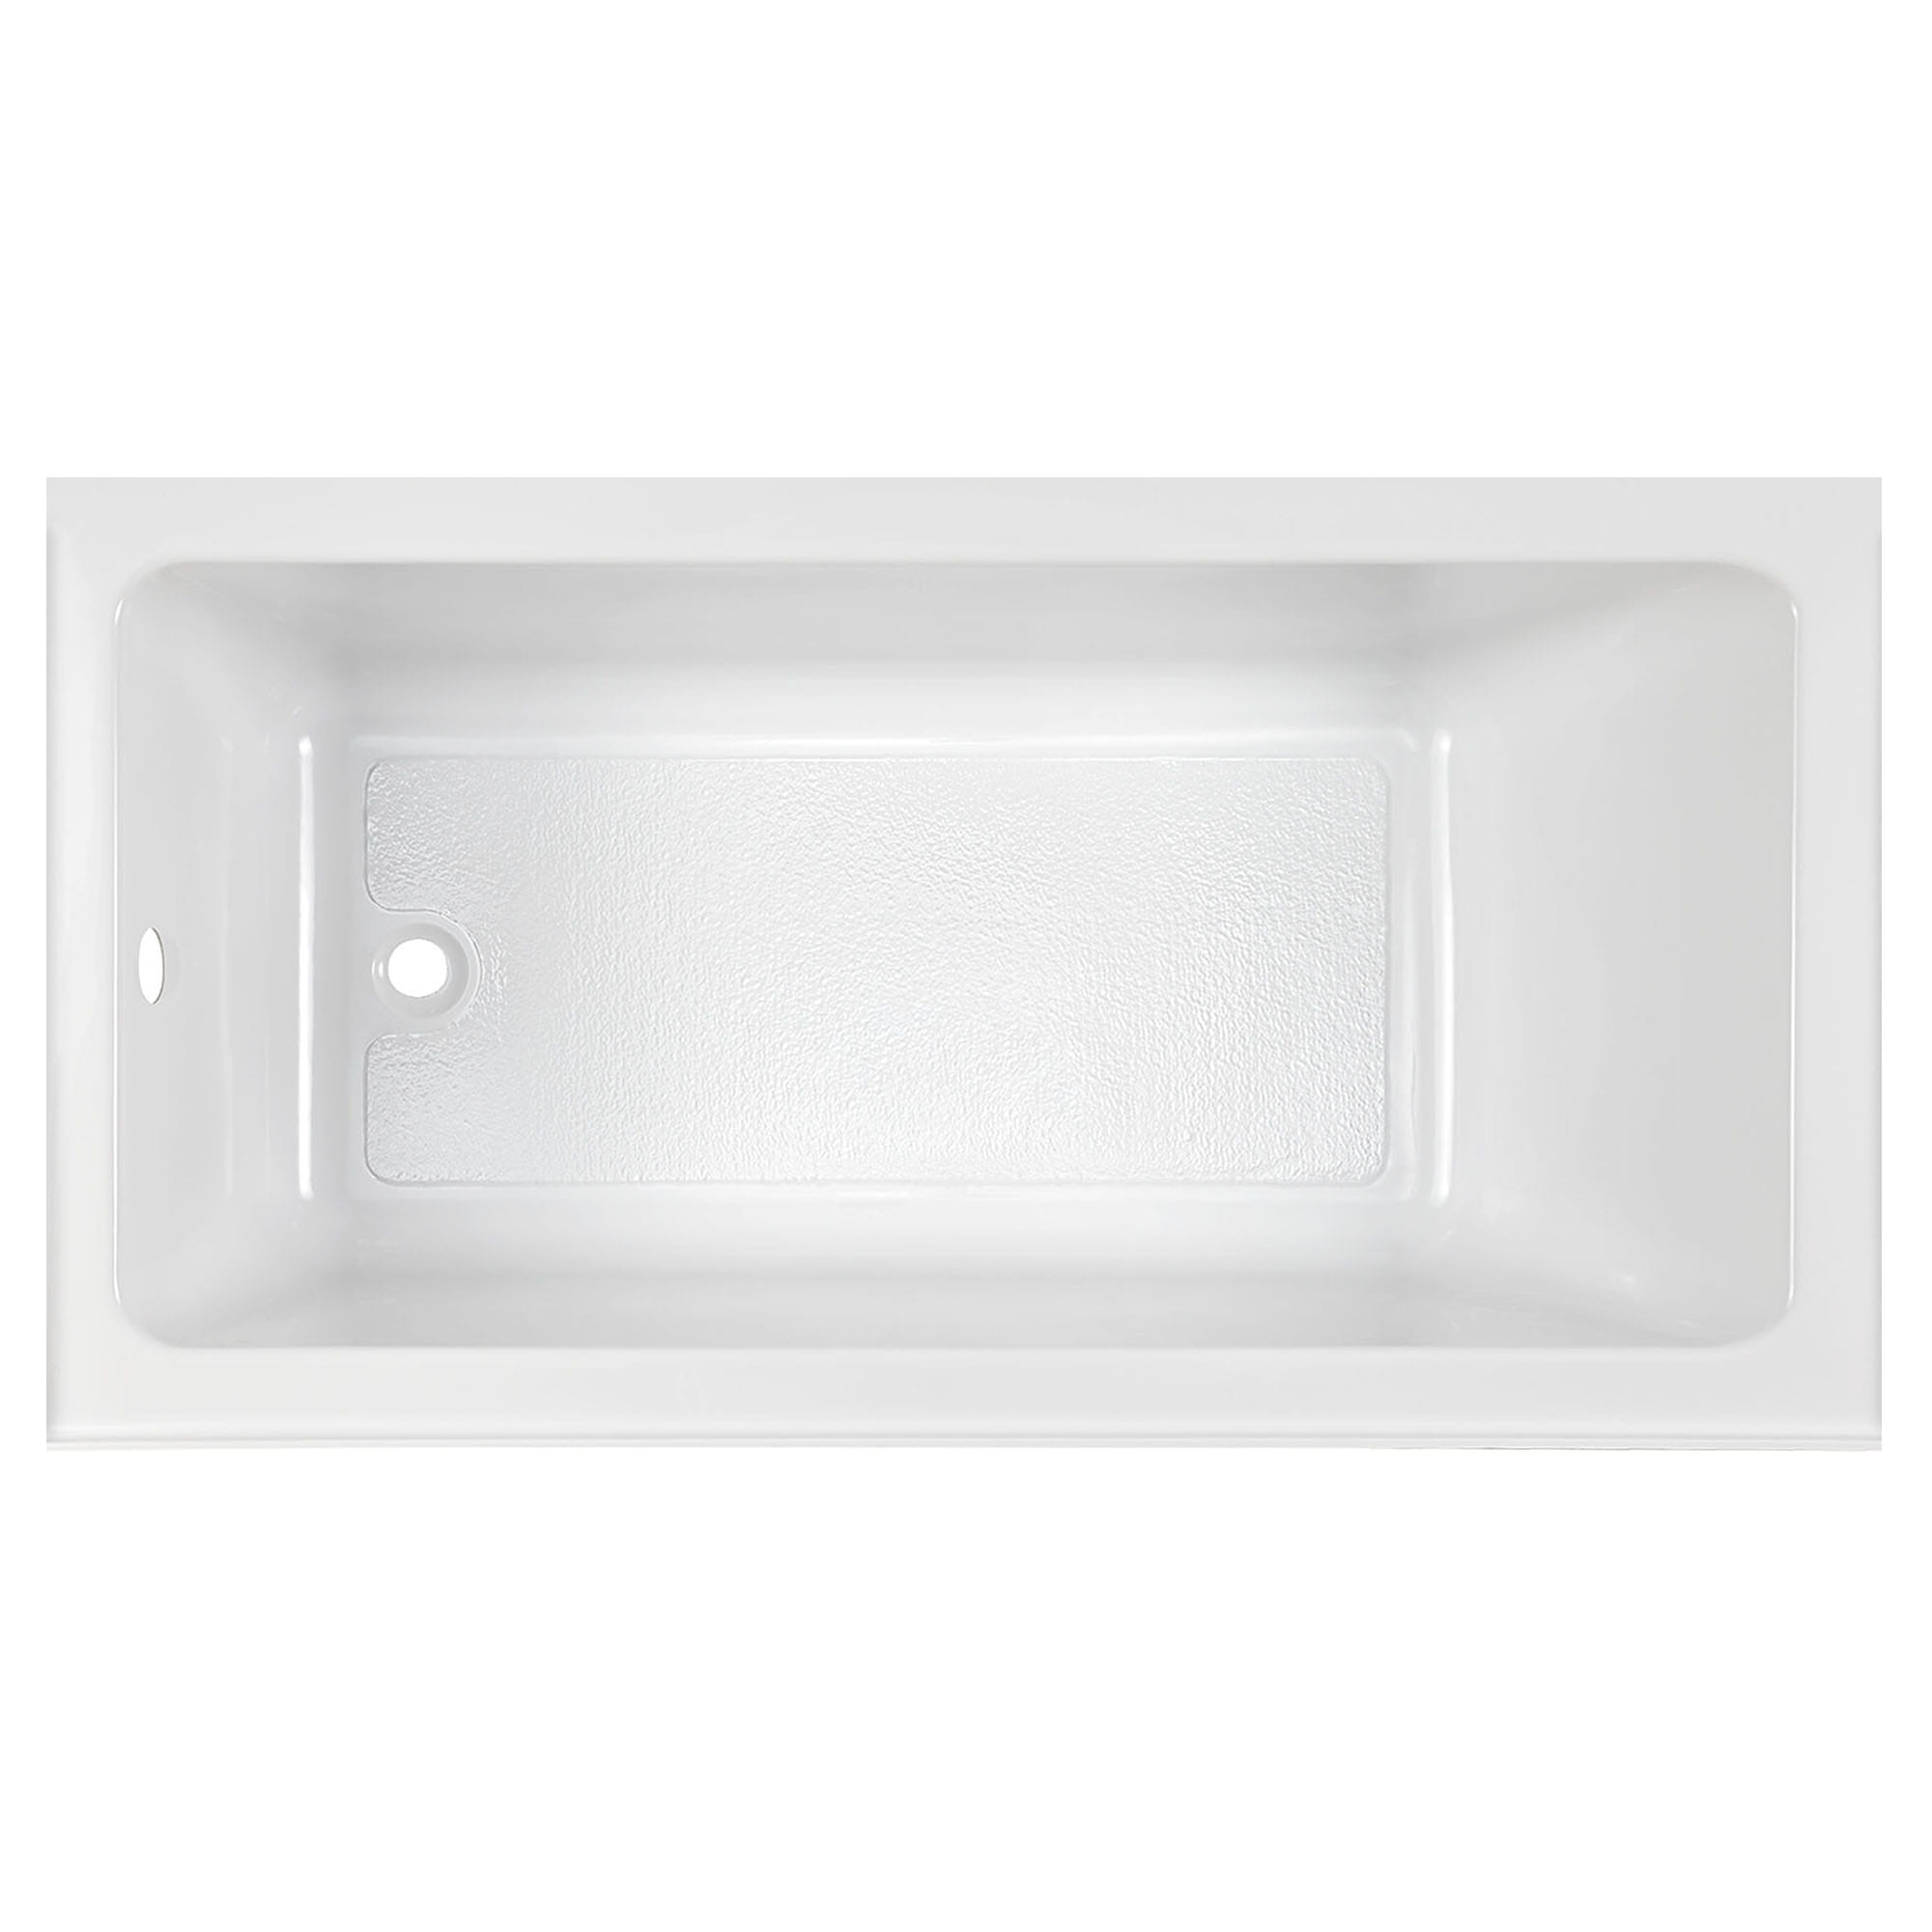 Studio® 60 x 32-Inch Integral Apron Bathtub Above Floor Rough With Left-Hand Outlet